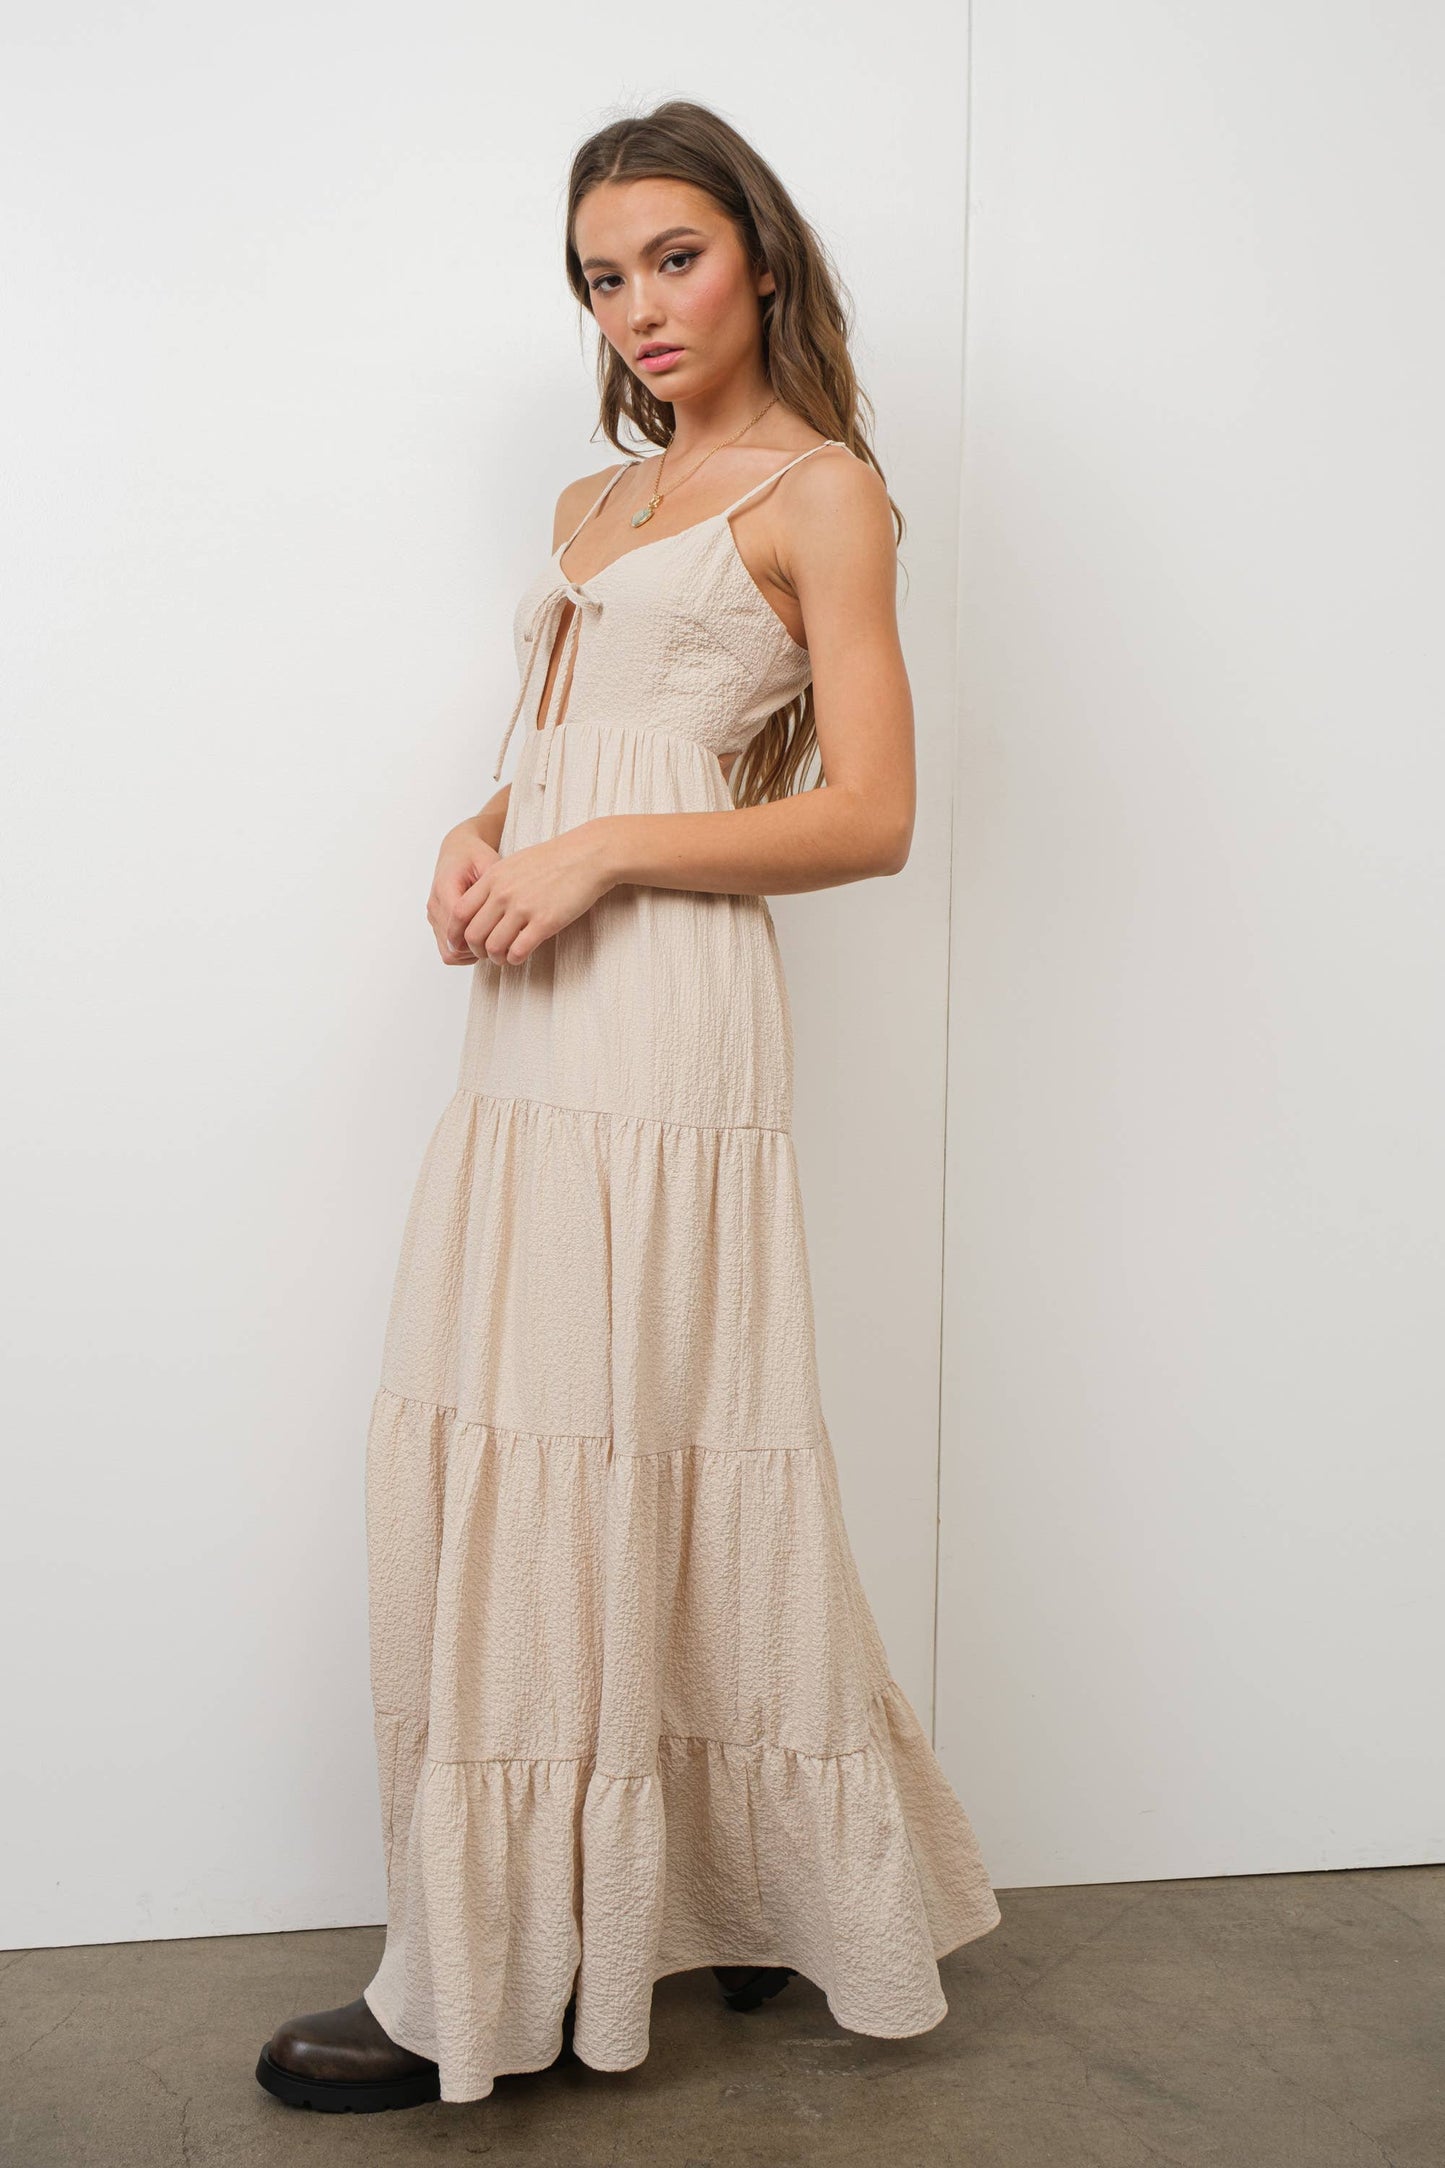 OPEN BACK TIERED MAXI DRESS